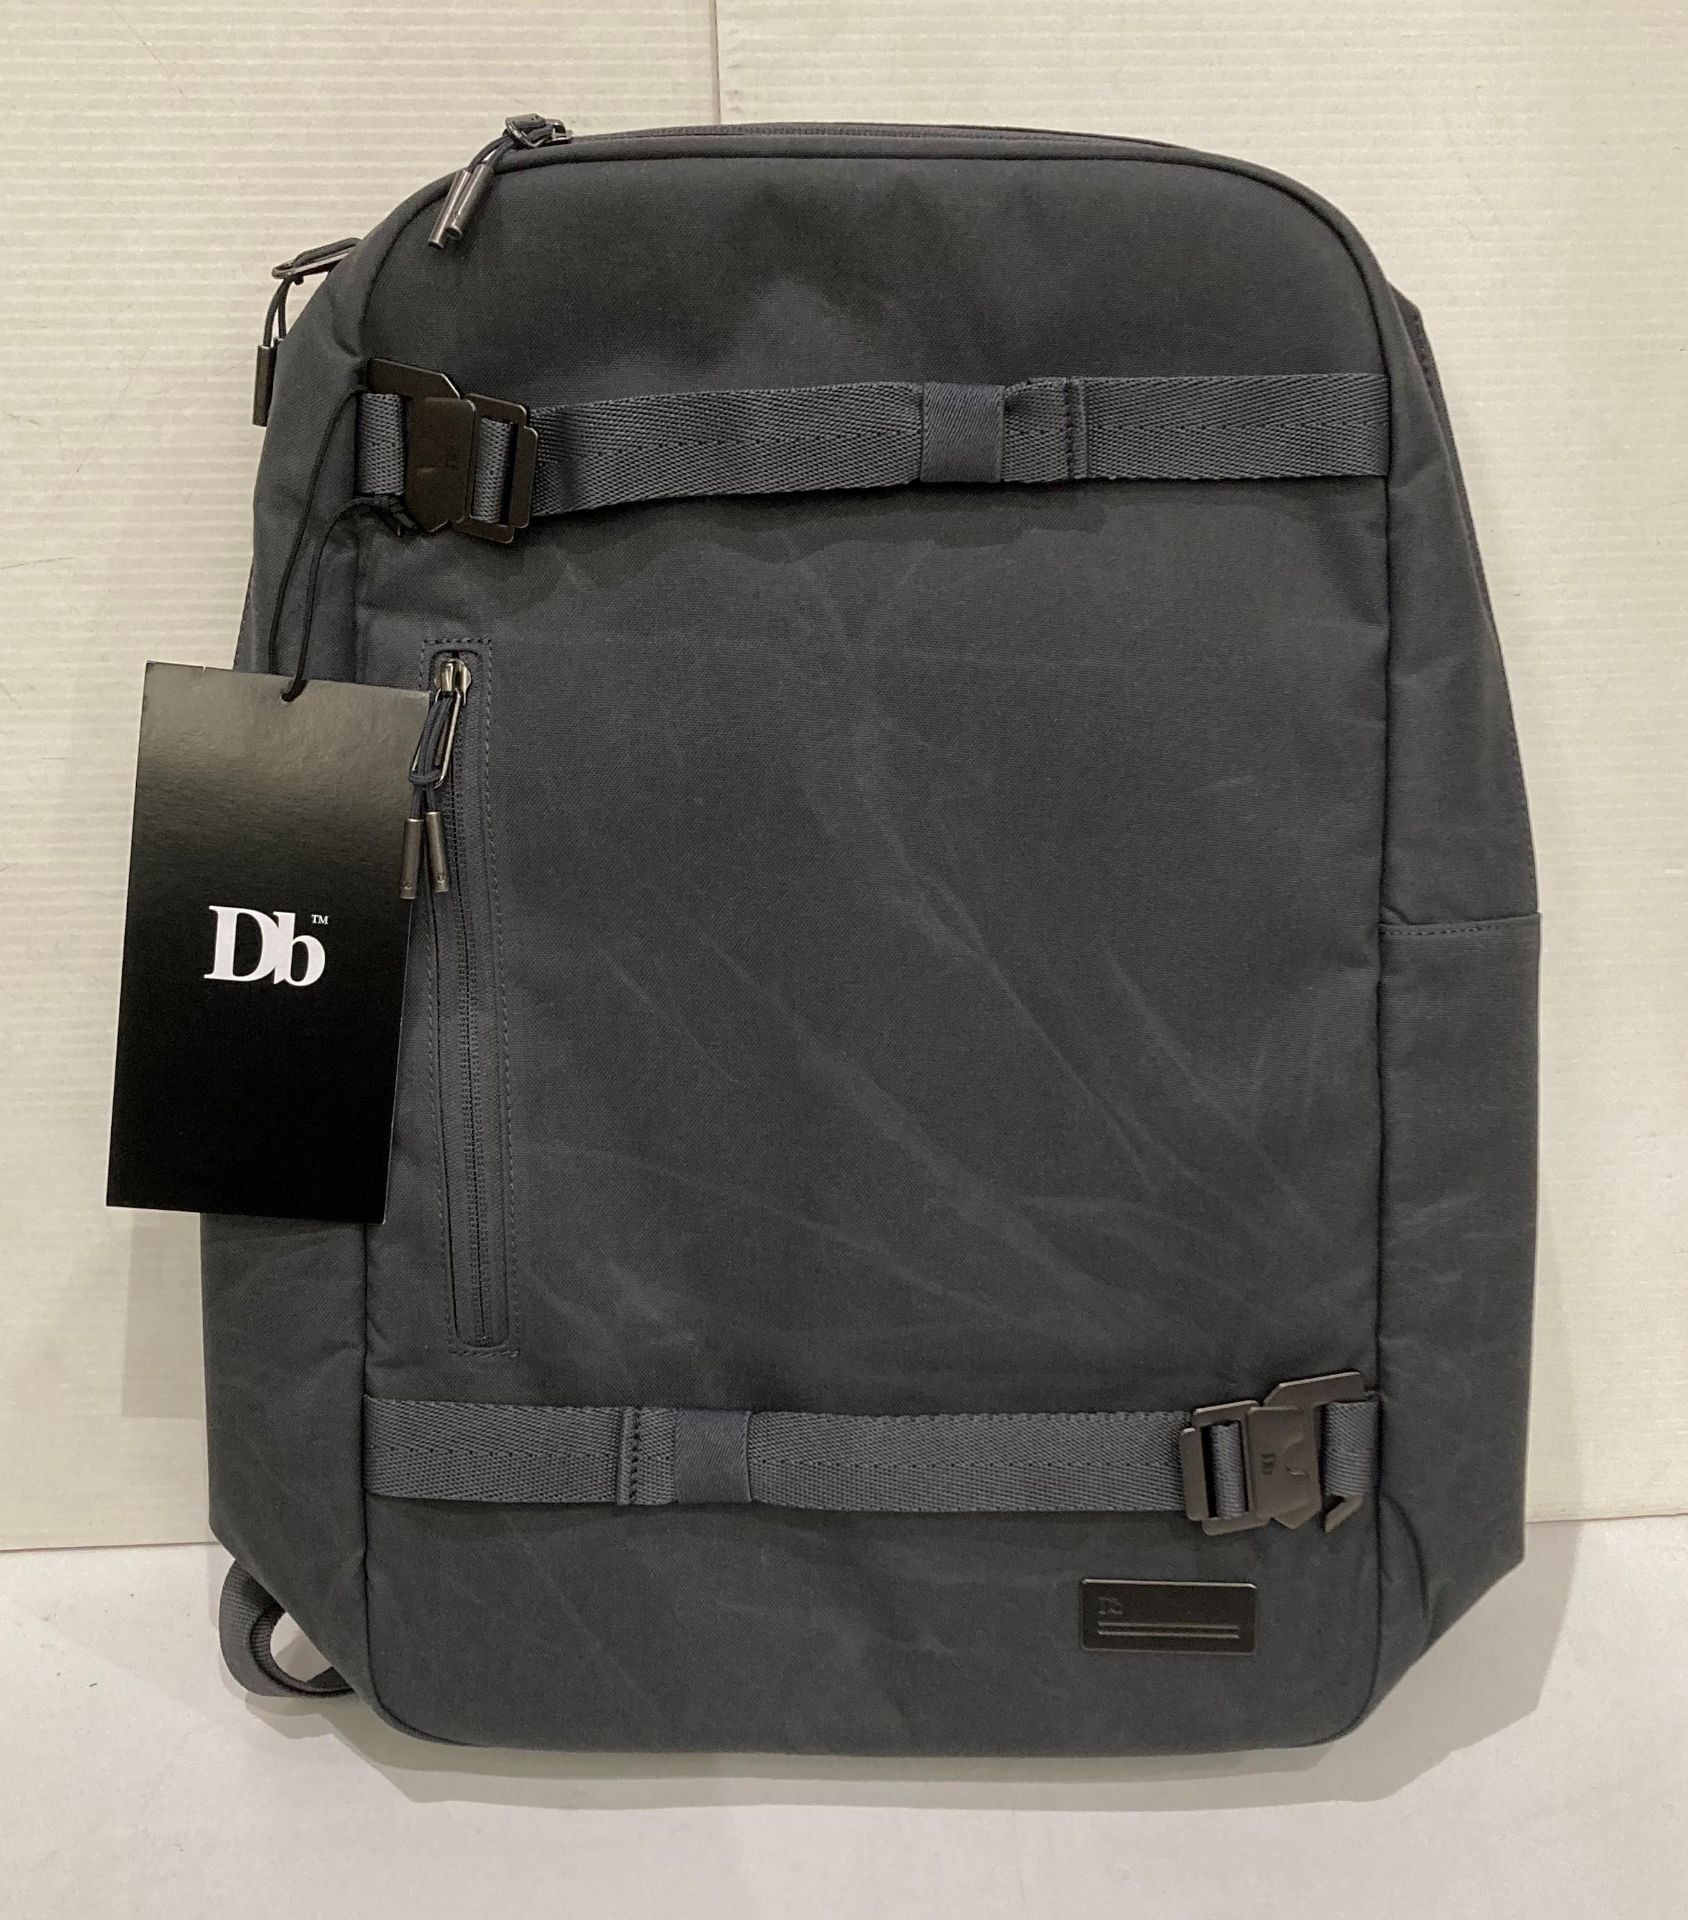 DB Essential Gneiss 17L backpack (RRP £99 with original tags) (saleroom location: S3 QC03)